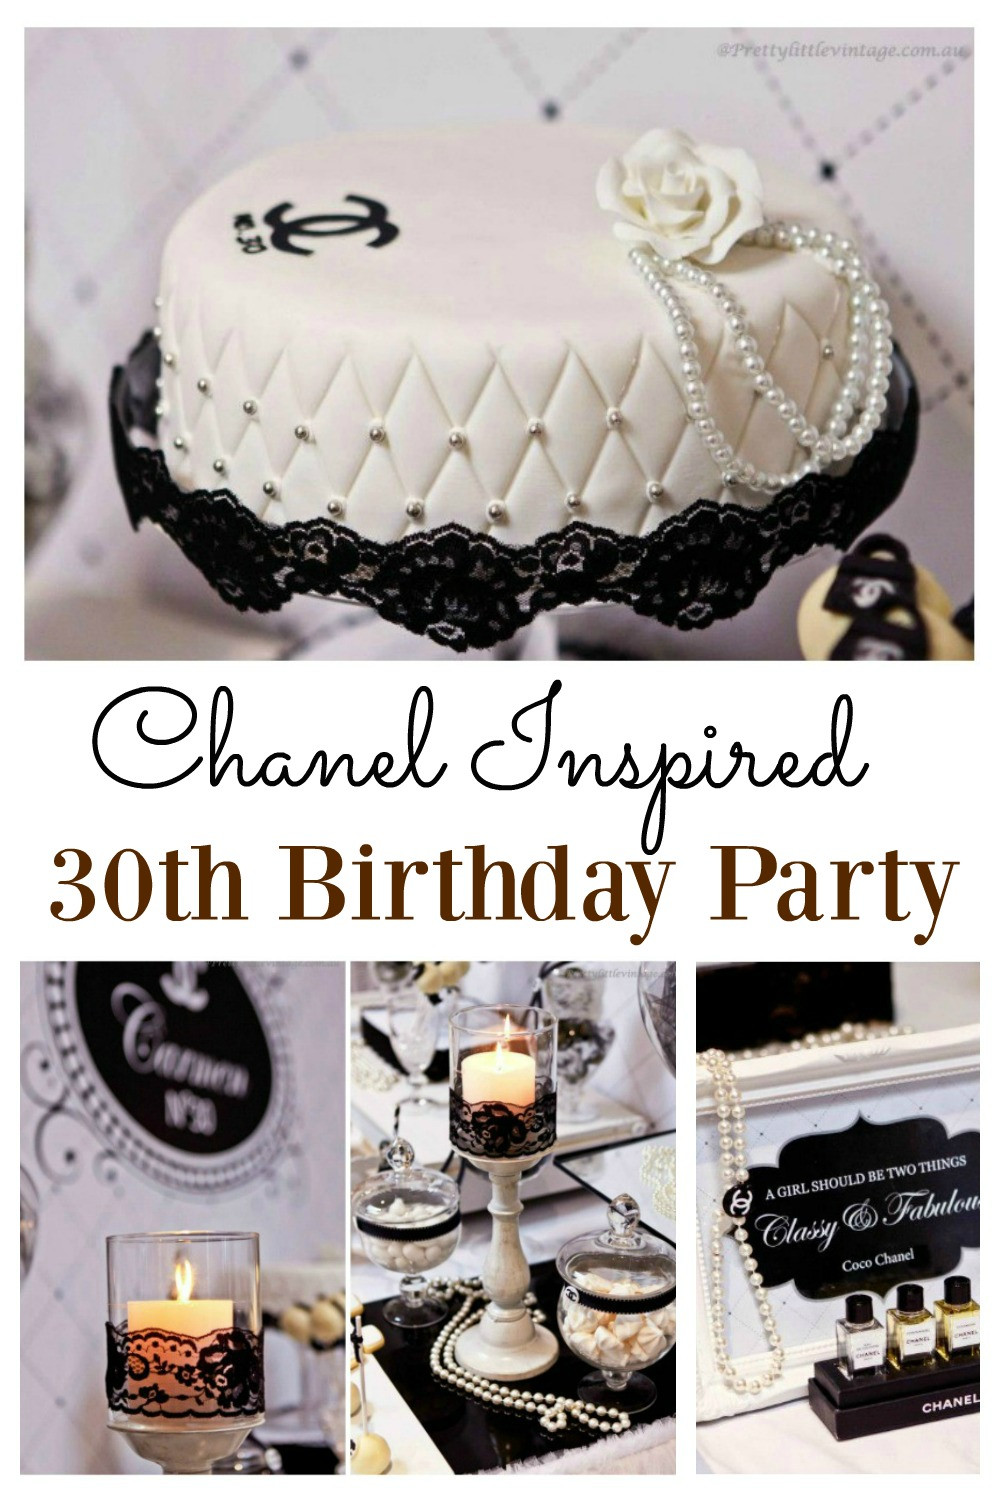 Party Ideas For 30Th Birthday
 Chanel Inspired 30th Birthday Party